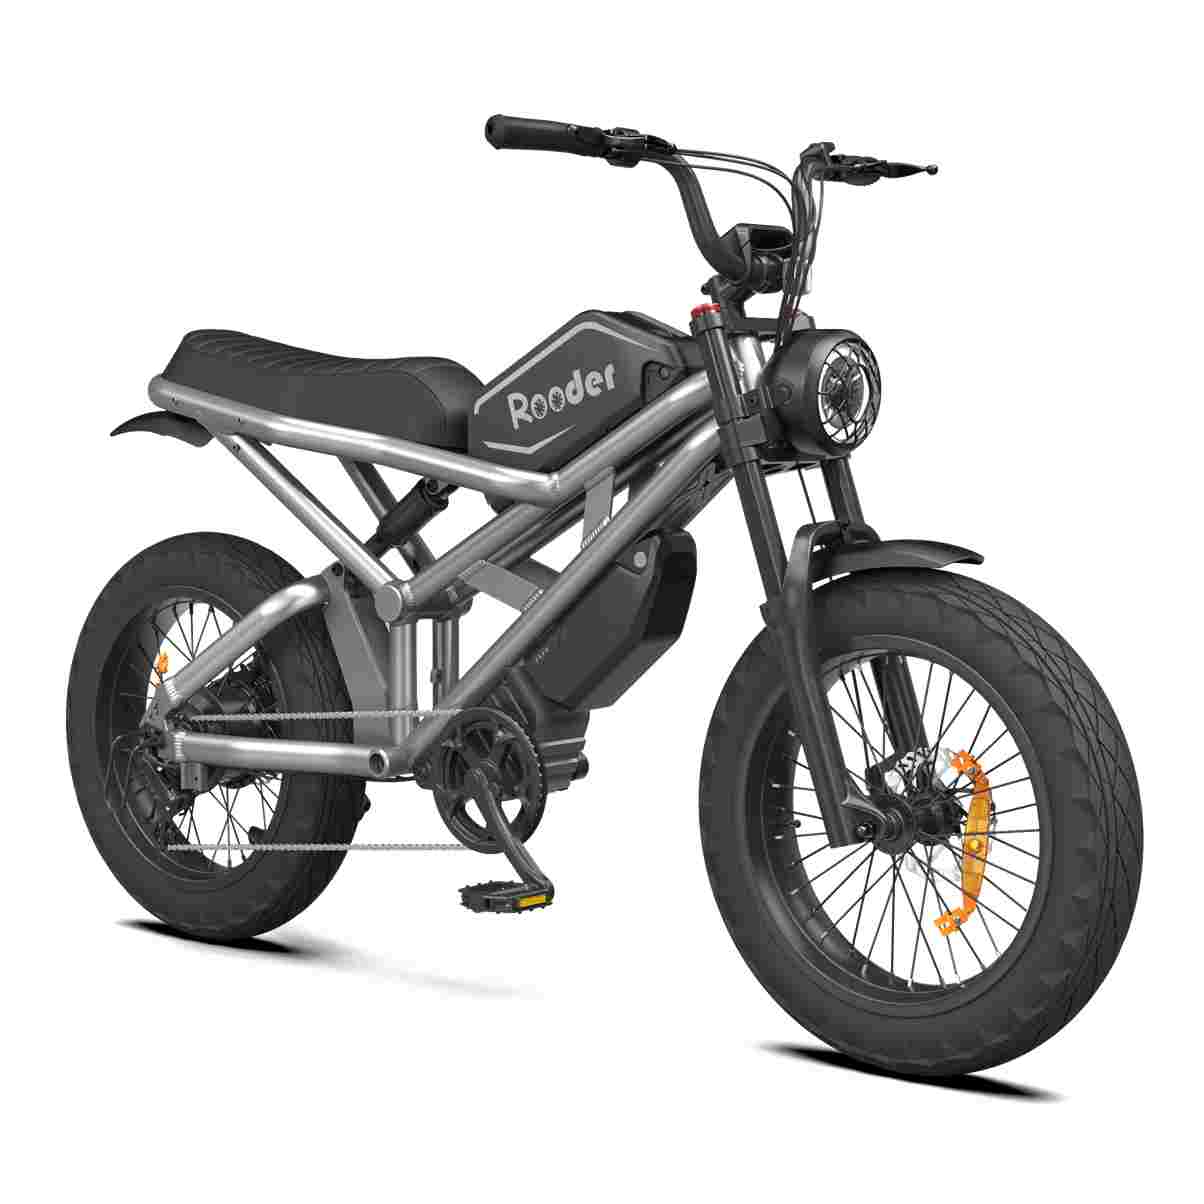 Most Powerful Electric Motorcycle wholesale price